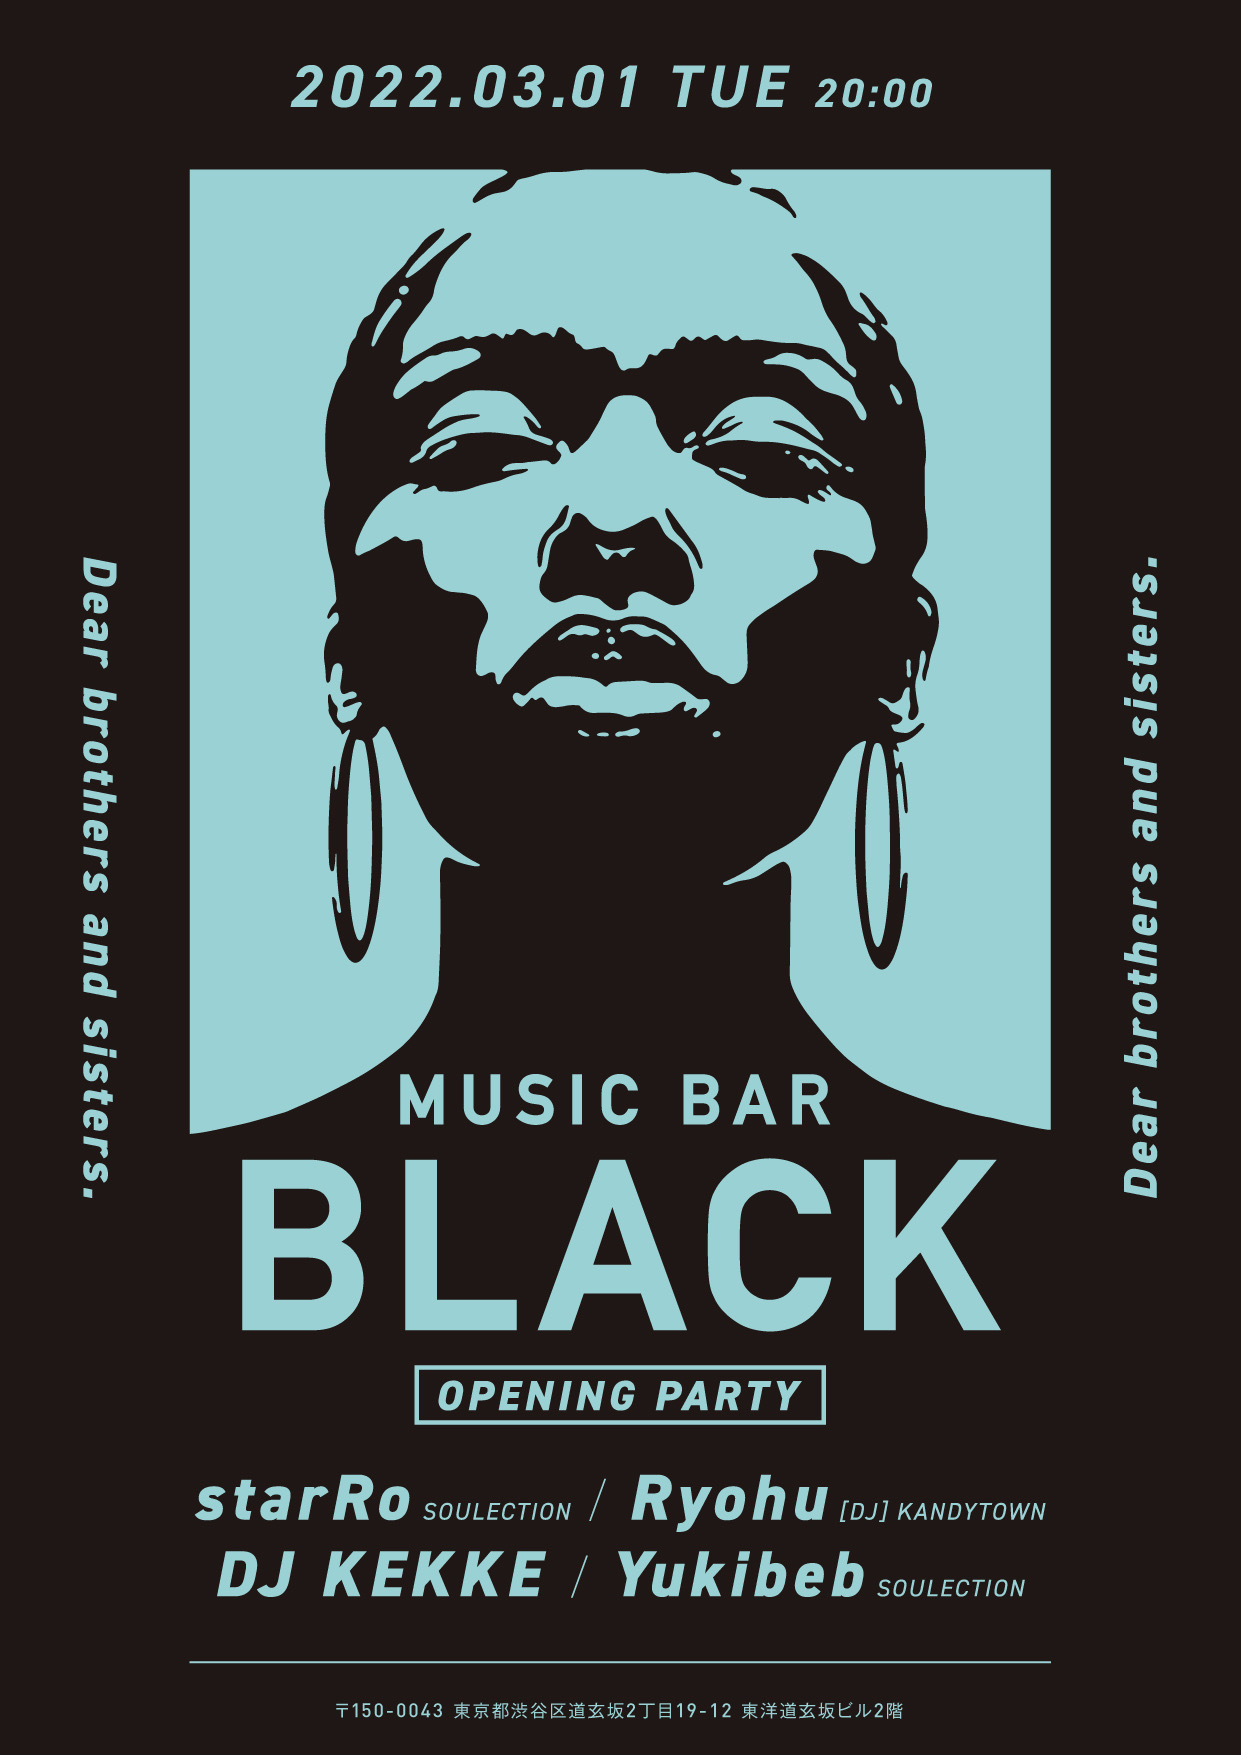 MUSIC BAR BLACK OPENING PARTY